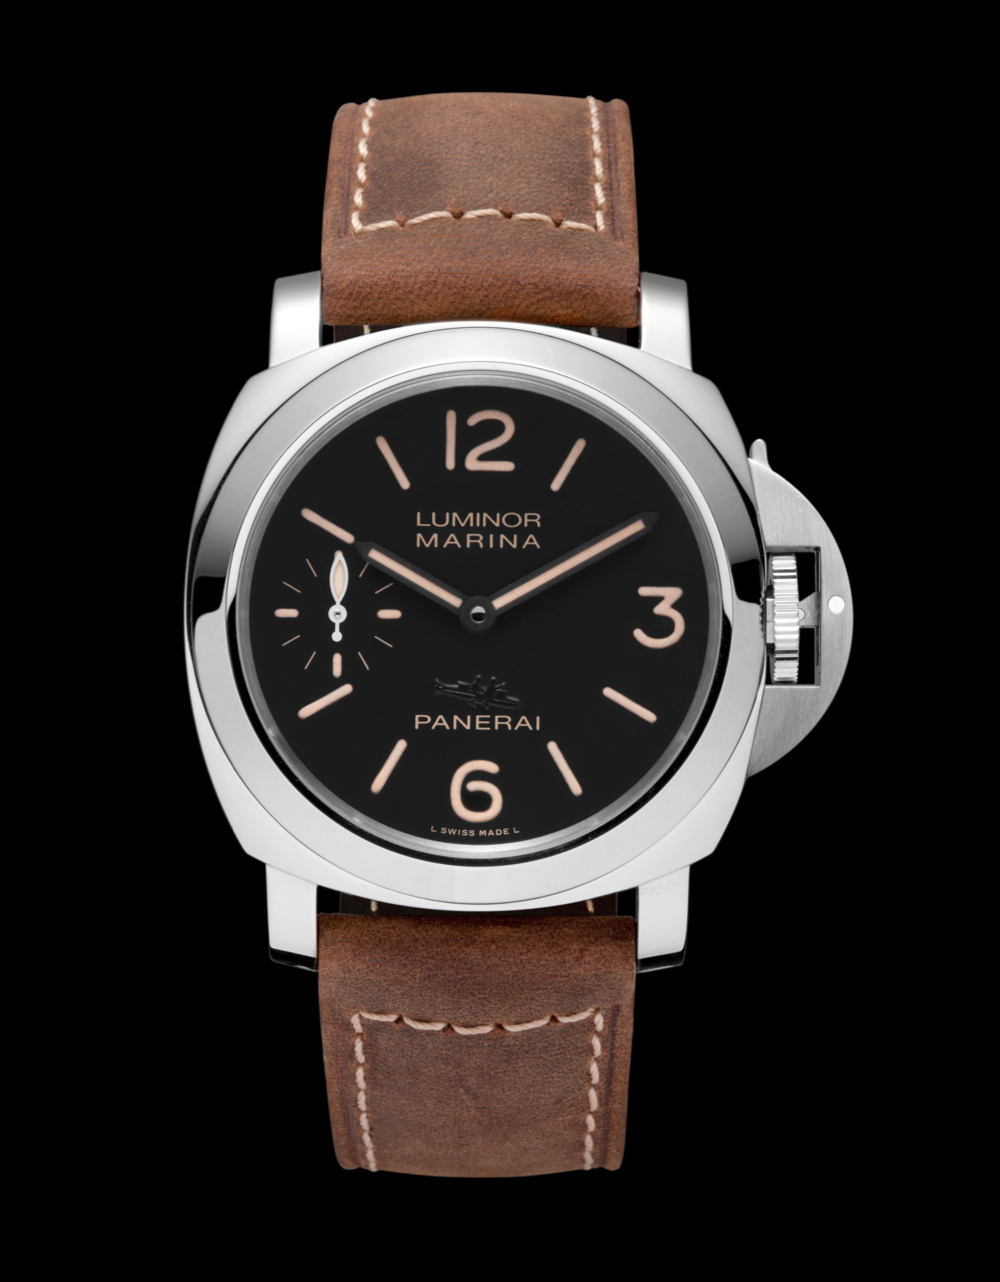 Panerai To Celebrate New U.S Boutiques with 2012 Special Edition Timepieces